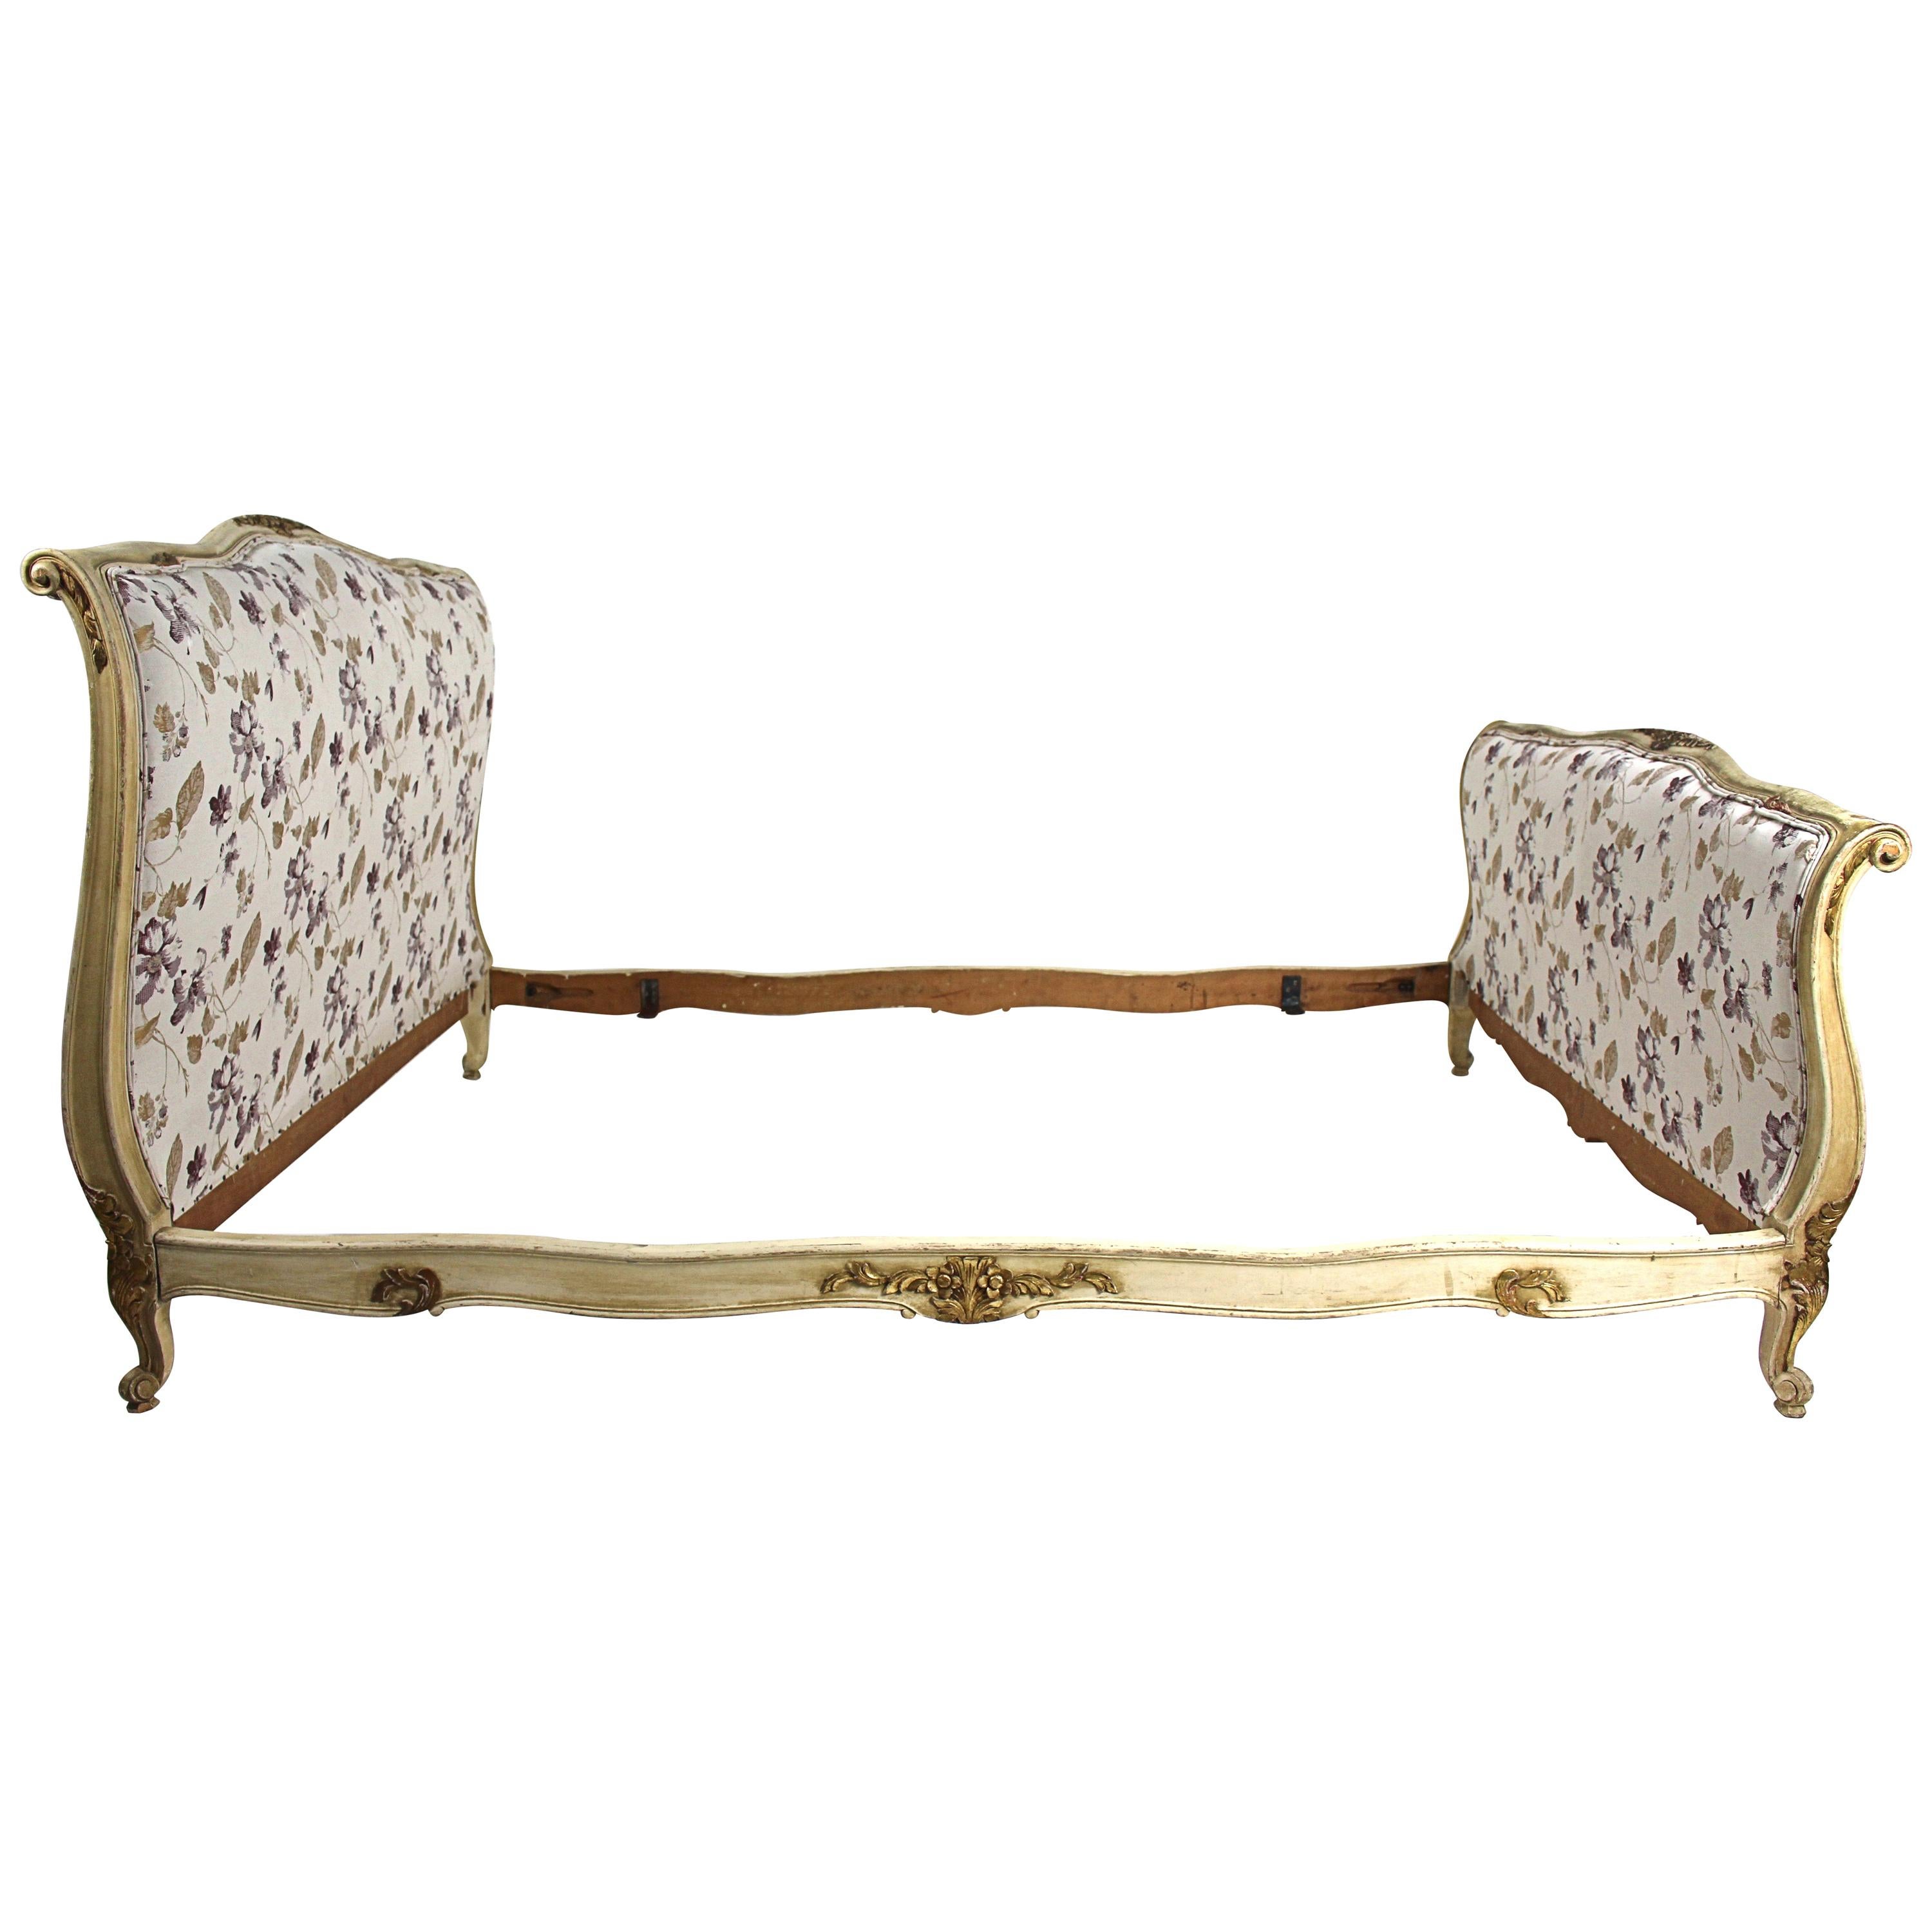 Late 19th Century French White Painted and Gilt Bed Frame For Sale